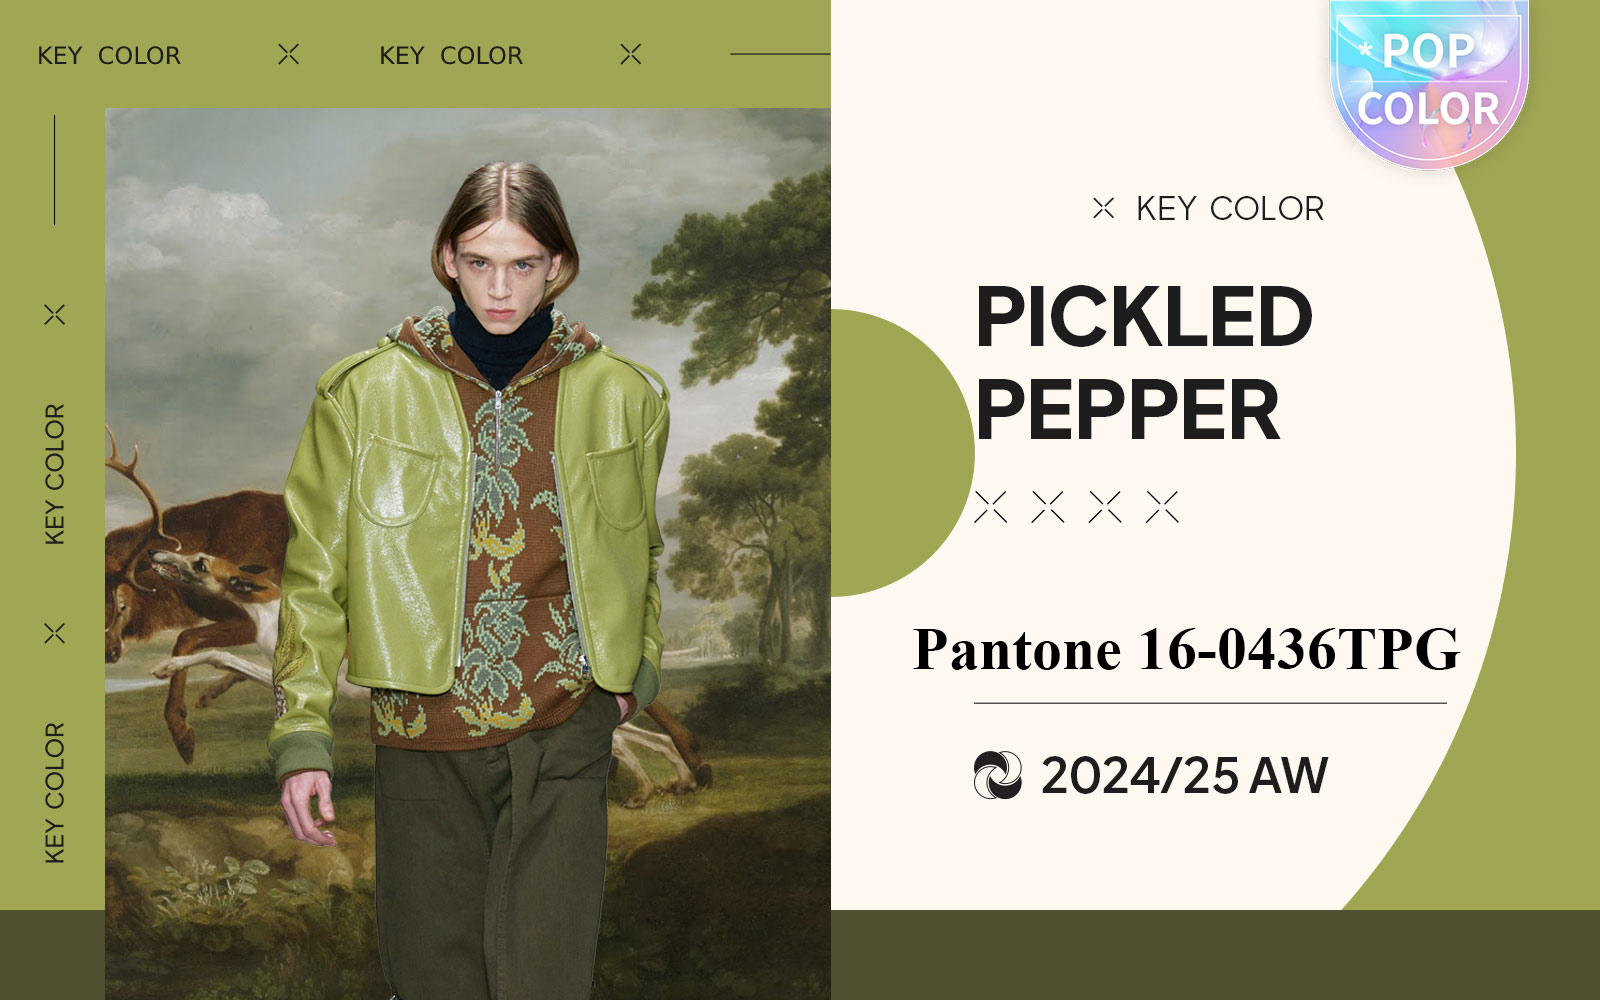 Pickled Pepper -- The Color Trend for Menswear